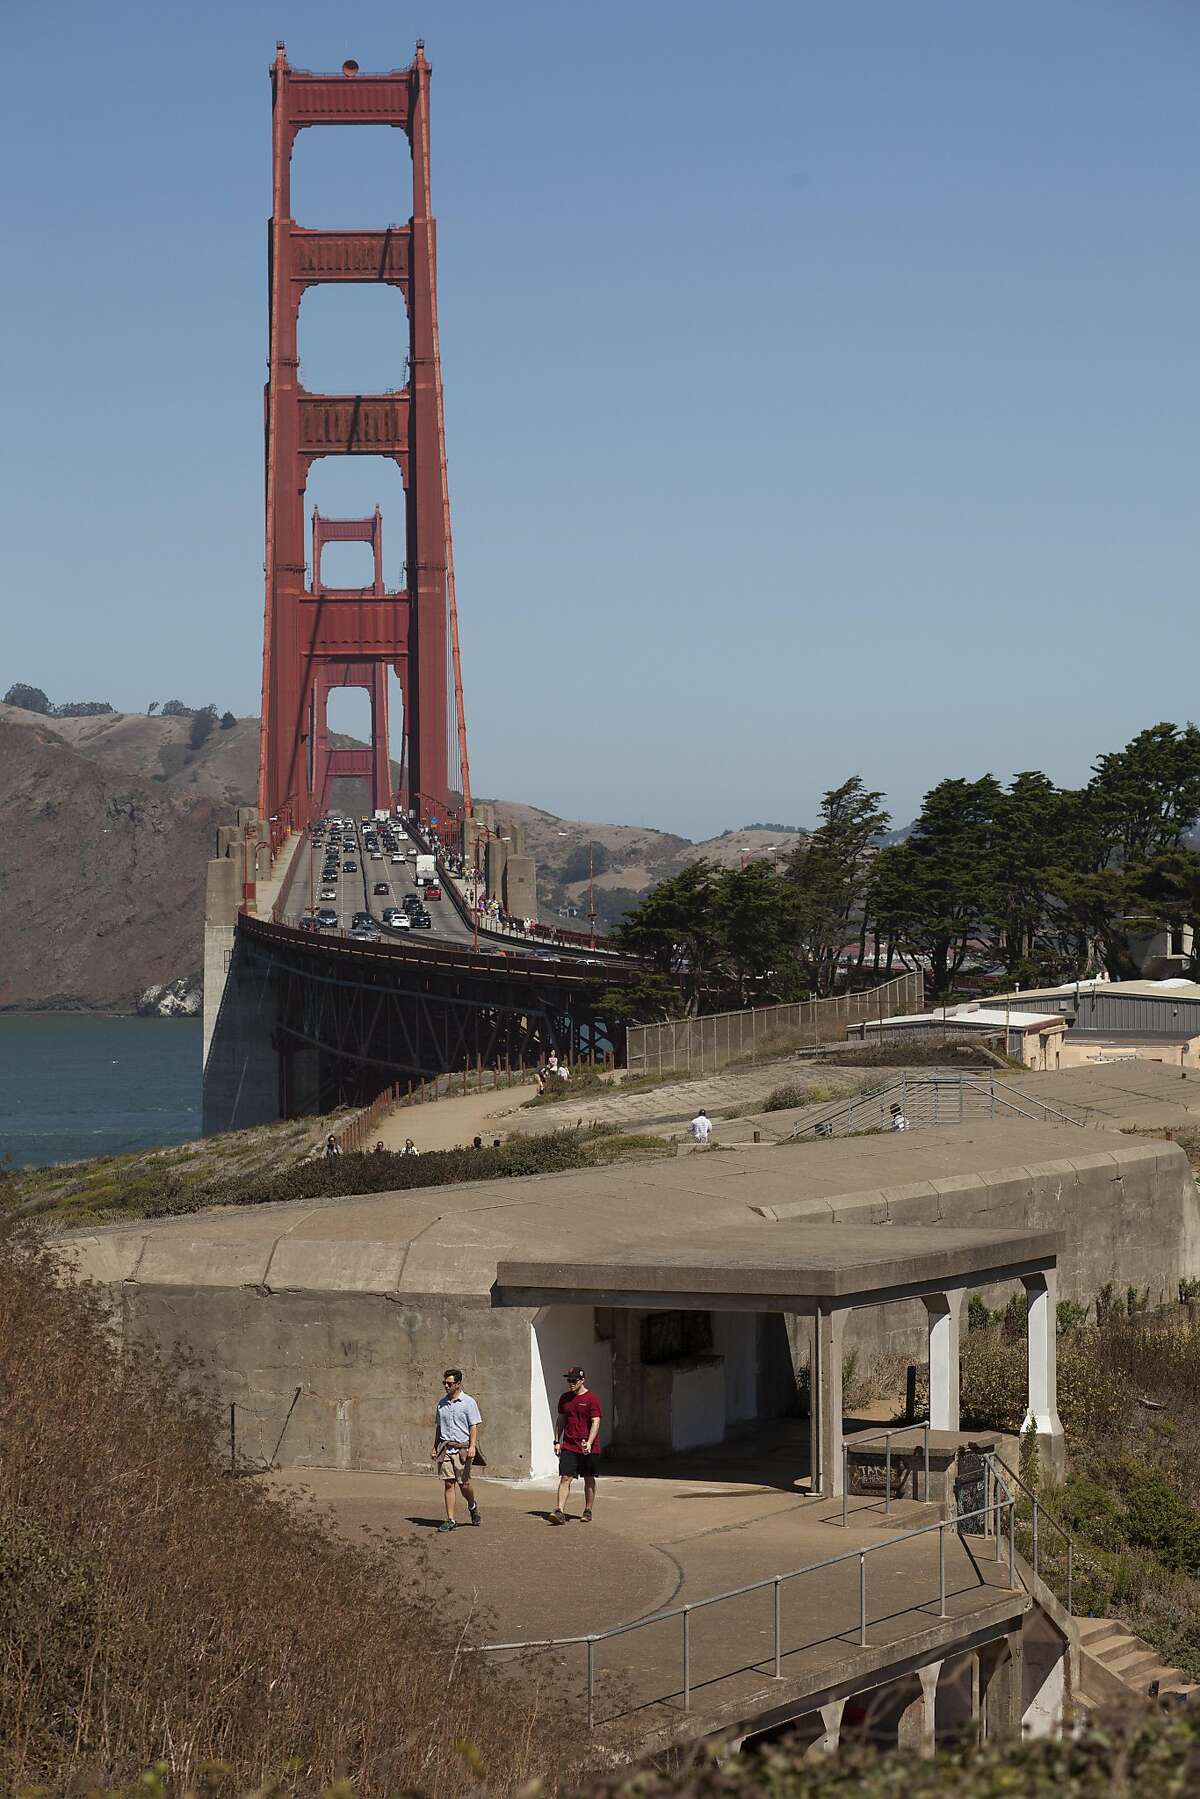 Tourist stroll over the top of Battery Marcus Miller, a partially underground, reinforced-concrete bunker, being used as a gallery space for the Home Land Security Exhibition in the Historic Military-Defense Structures in the Presidio over looking the Golden Gate bridge, in San Francisco, California, USA 30 Aug 2016. (Peter DaSilva/Special to The Chronicle)